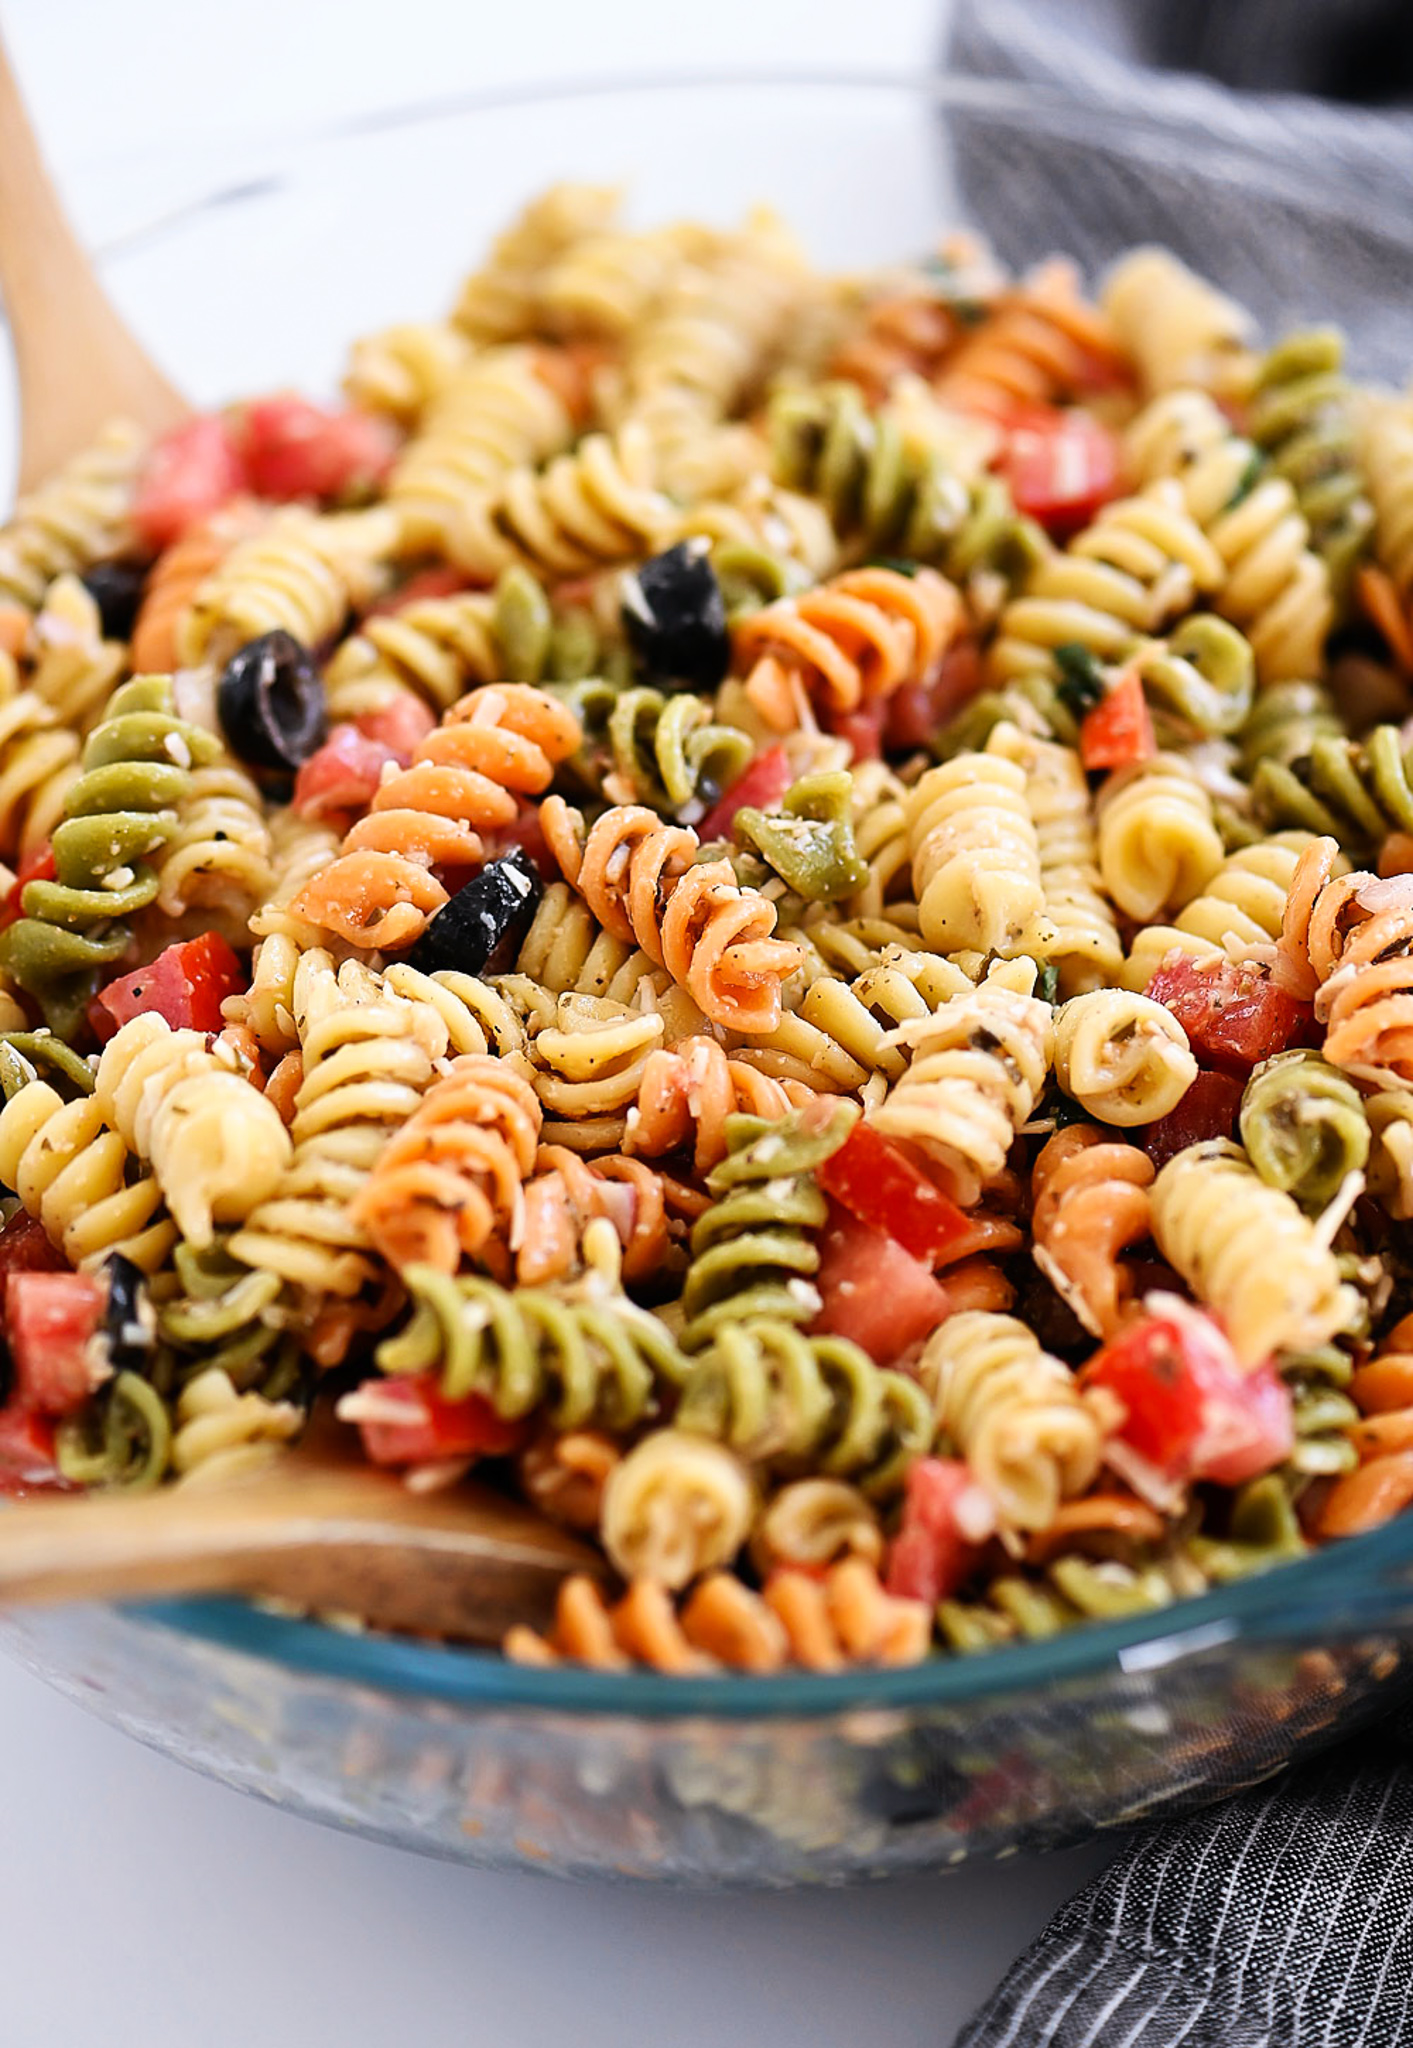 Tri Color Pasta Salad is filled with noodles, fresh veggies, and Parmesan cheese. It’s tossed in a creamy Caesar dressing and basil pesto 